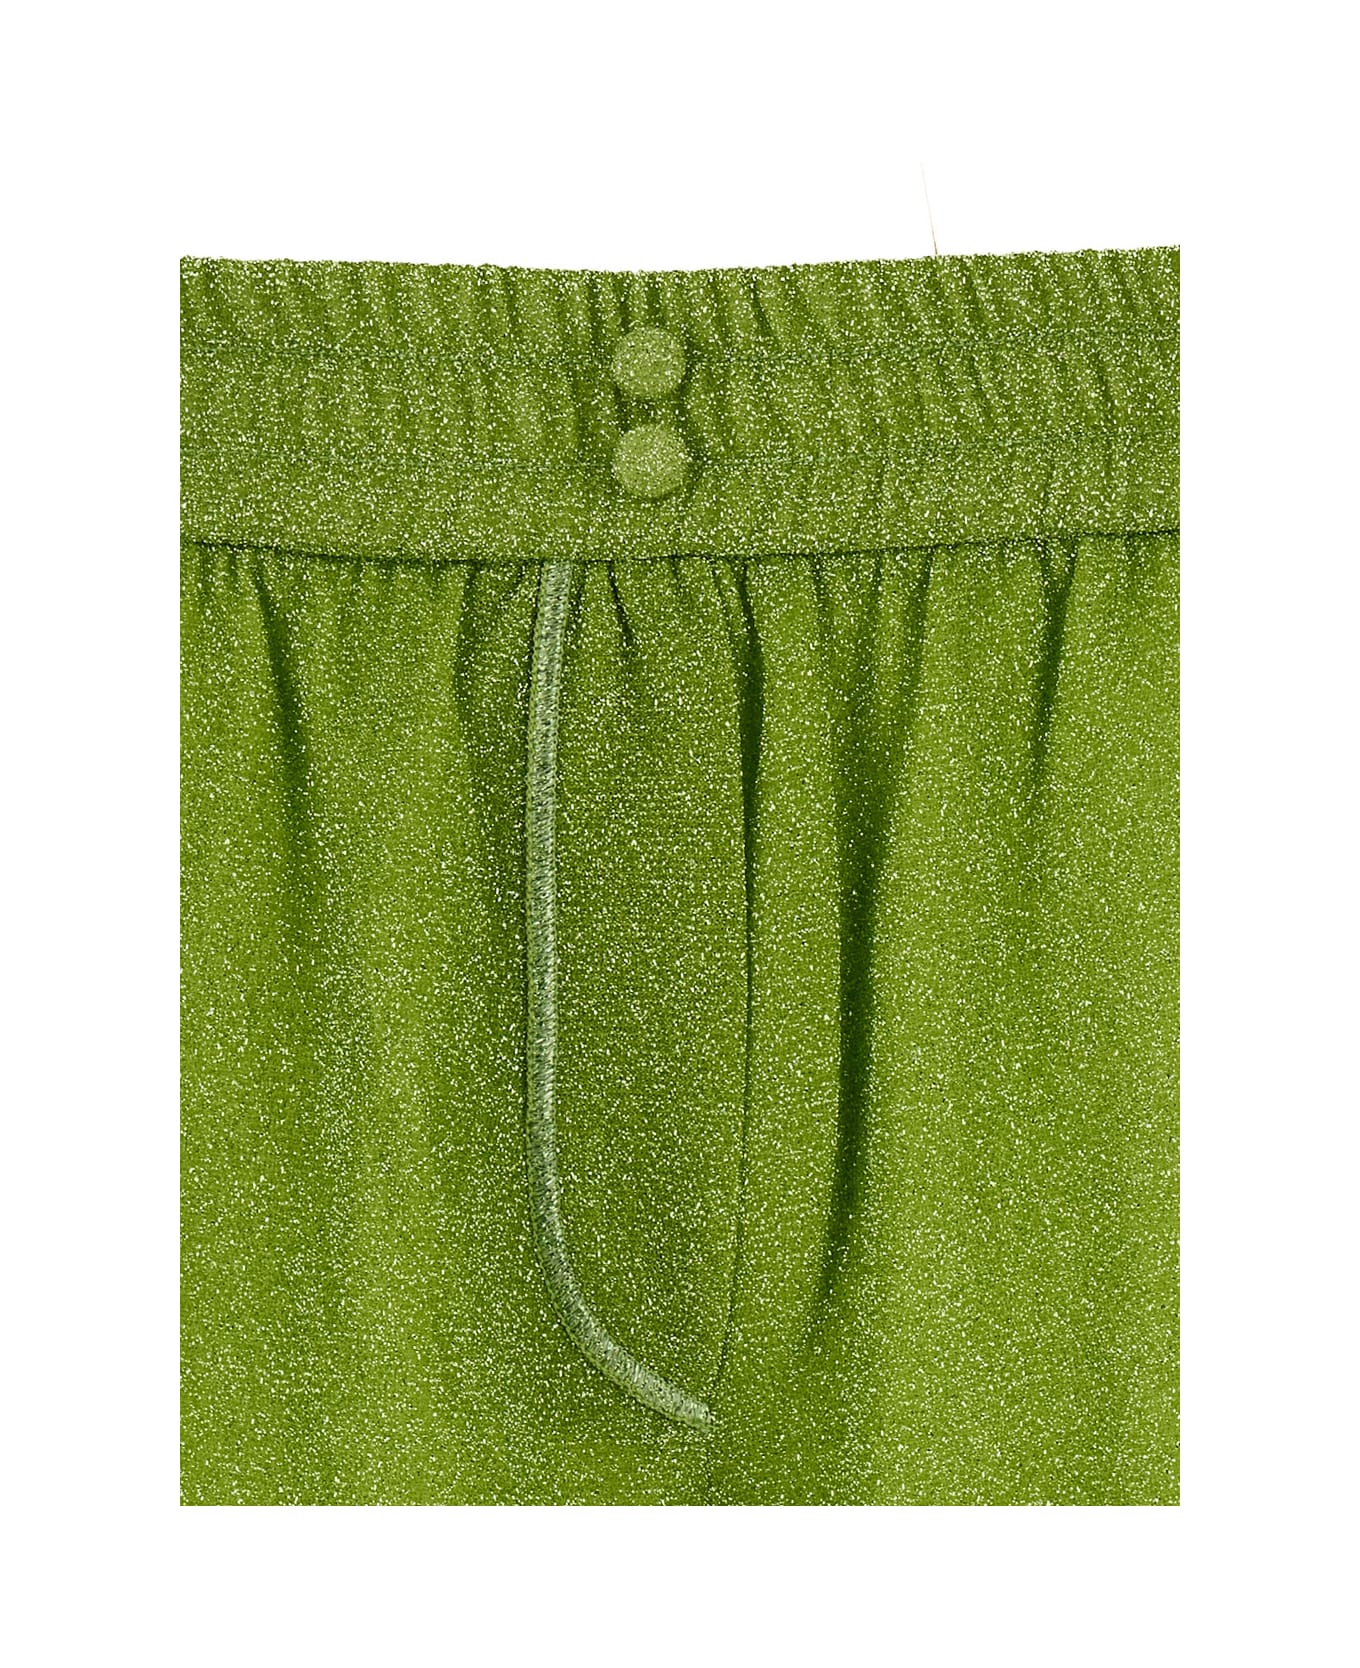 Oseree Green Shorts With Elastic Waistband In Lurex Woman - Green